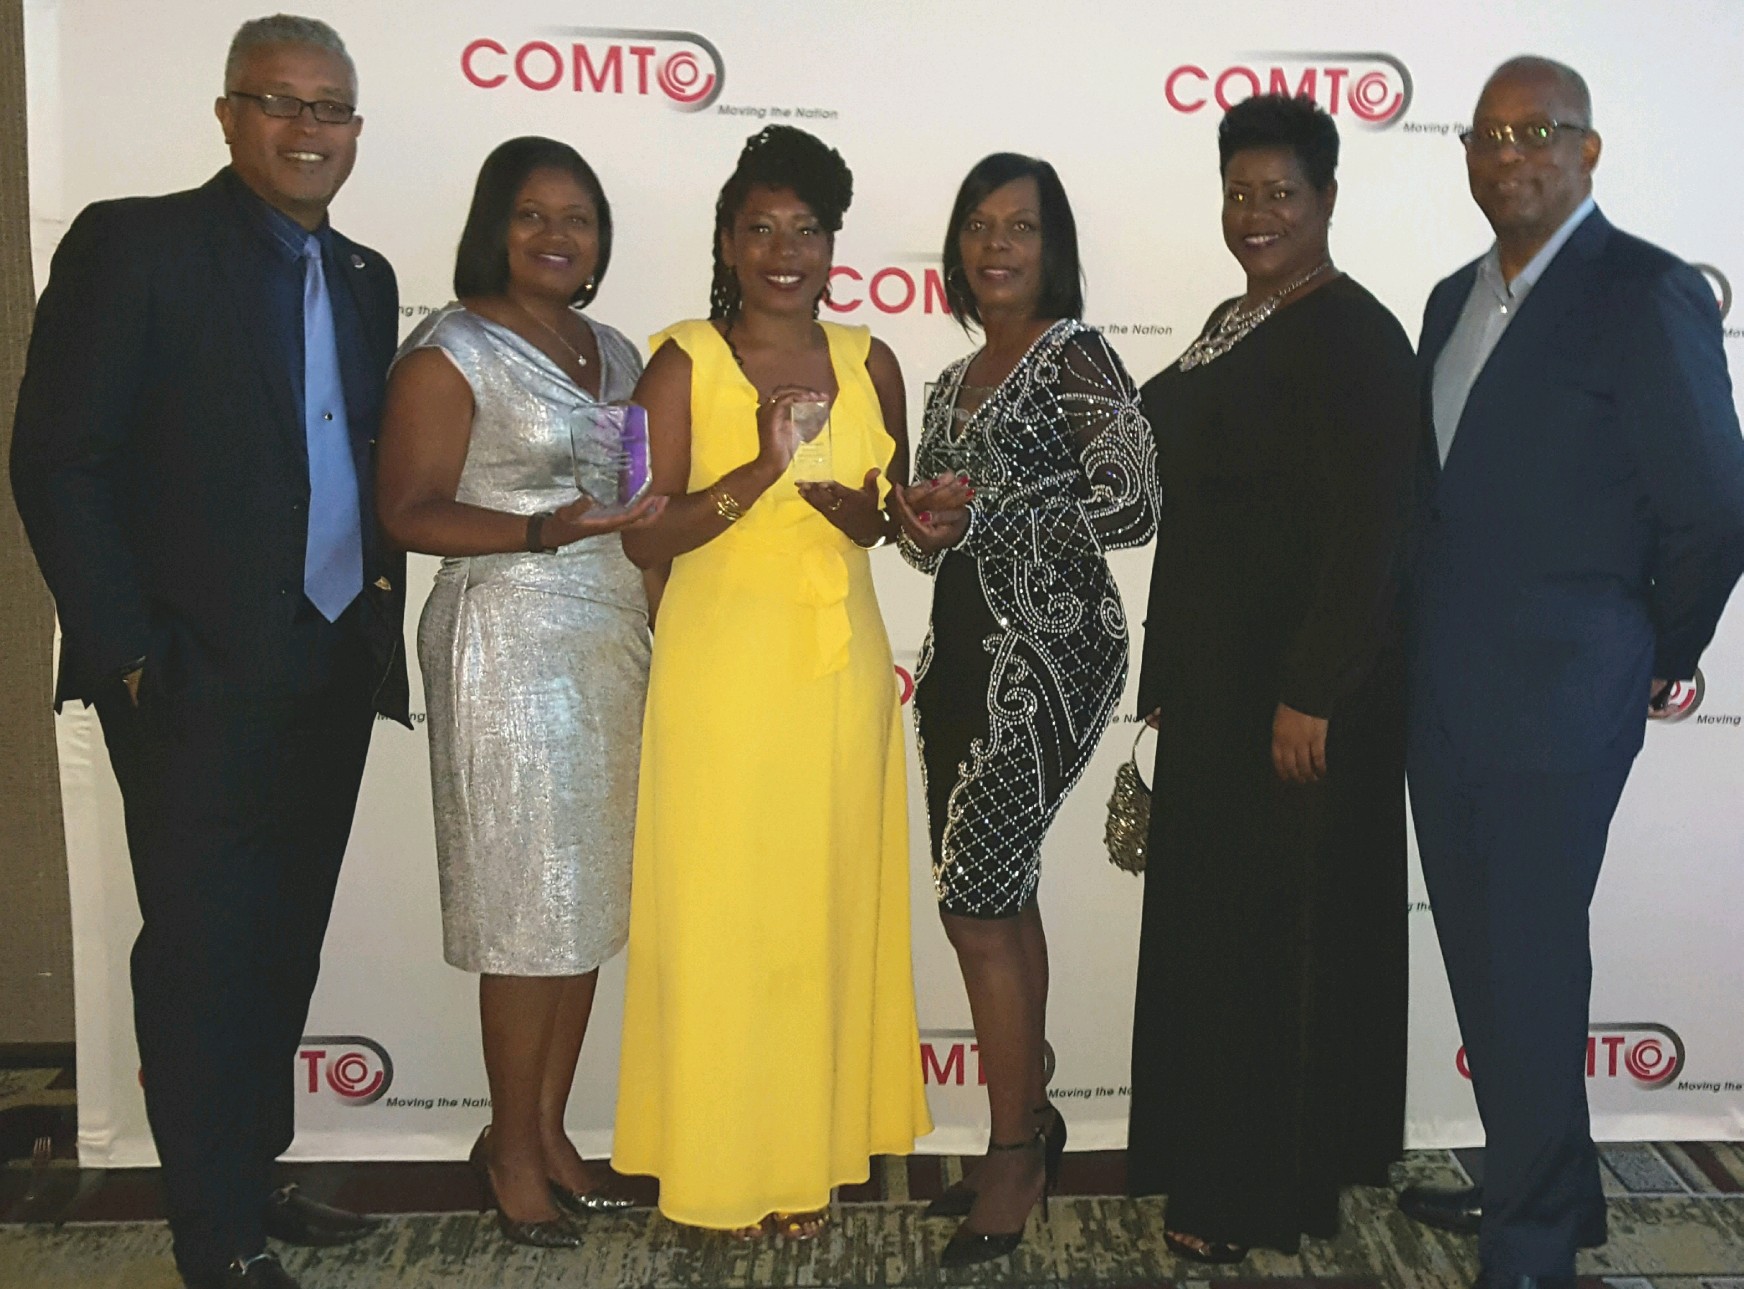 COMTO Jacksonville Wins Big at National Conference!